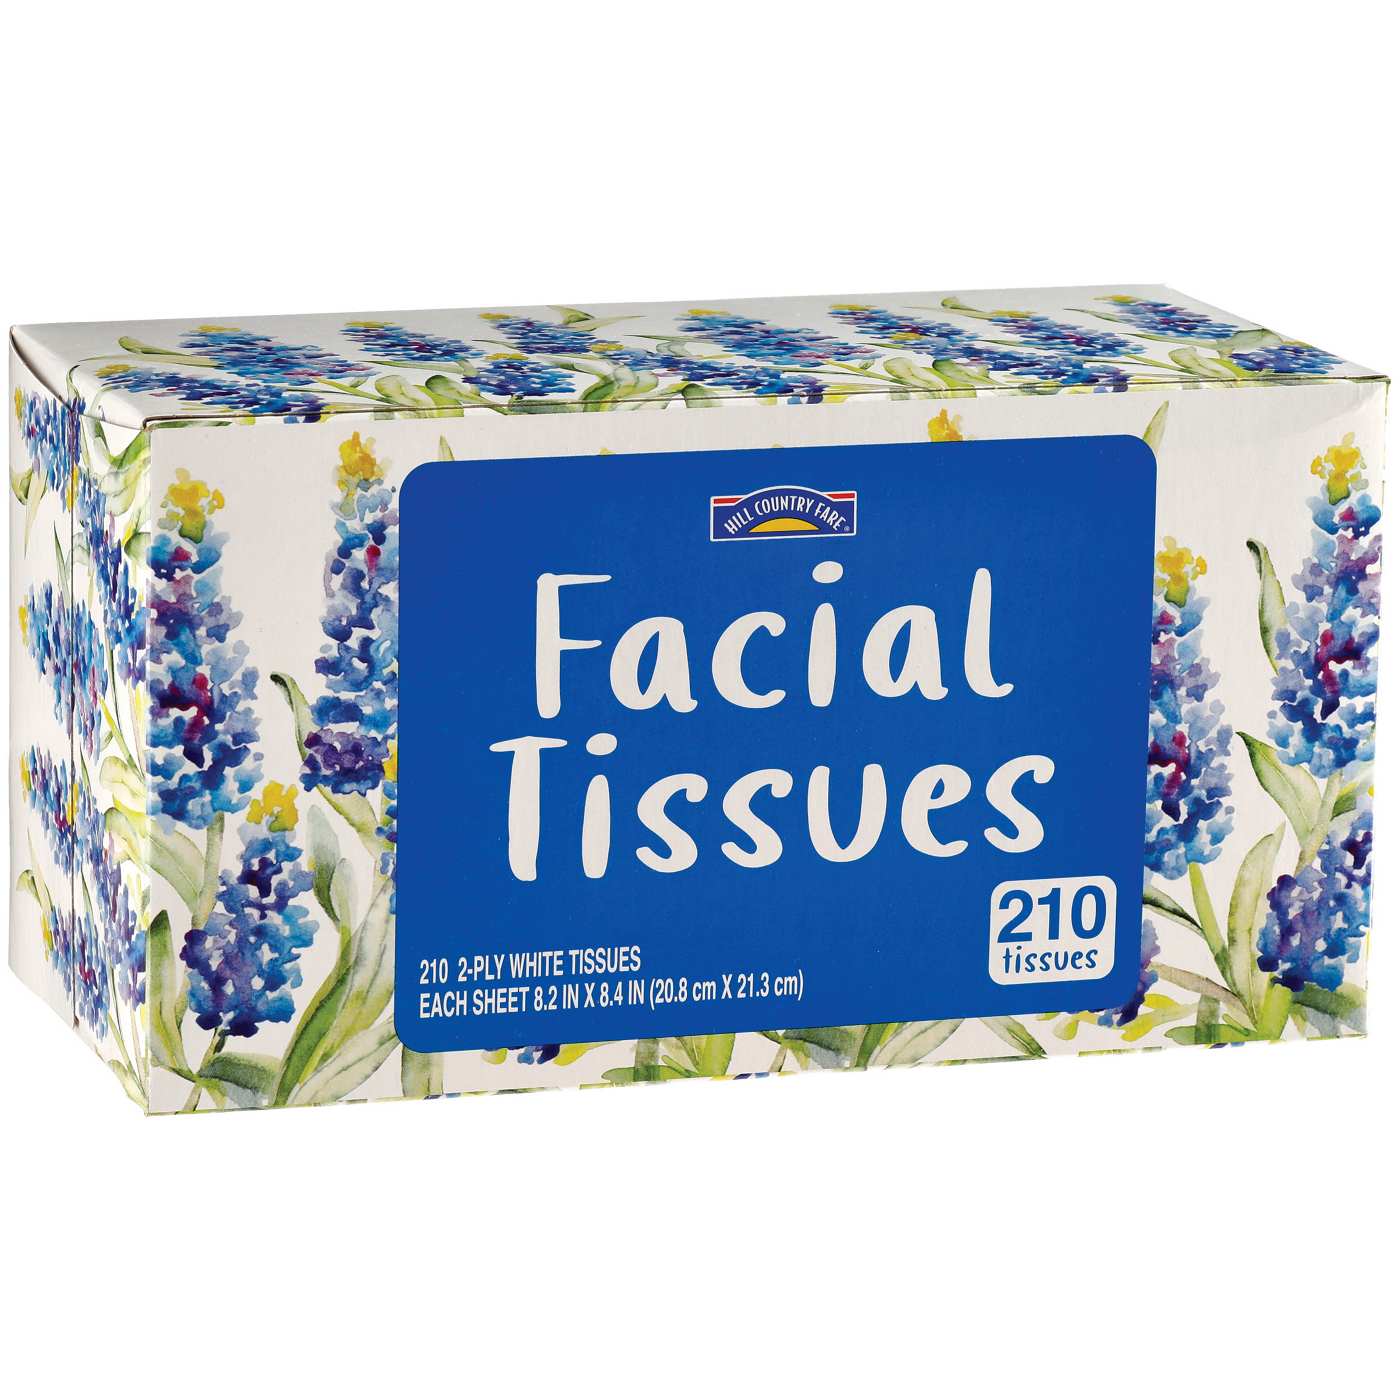 Hill Country Fare Facial Tissues; image 4 of 4